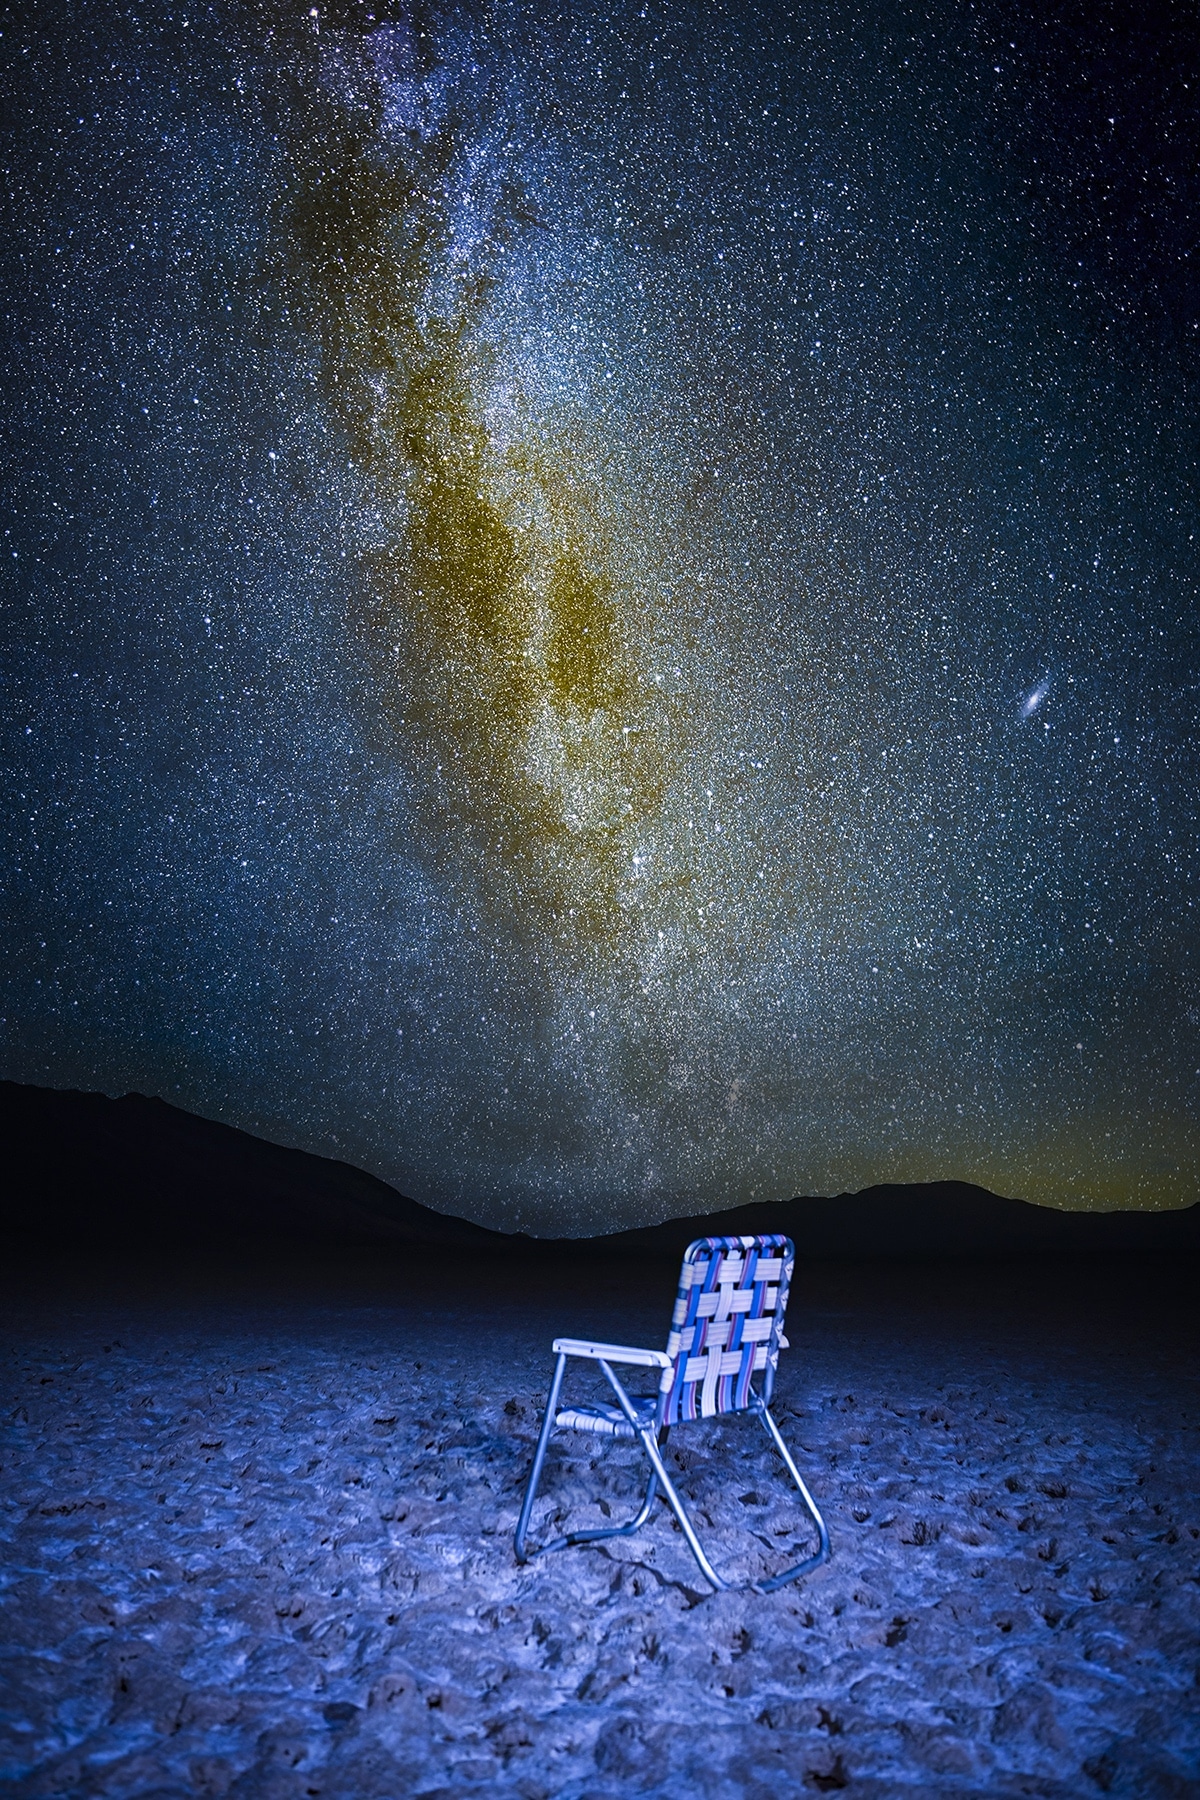 Astrophotography in Panamint Valley by Paul Cheyne